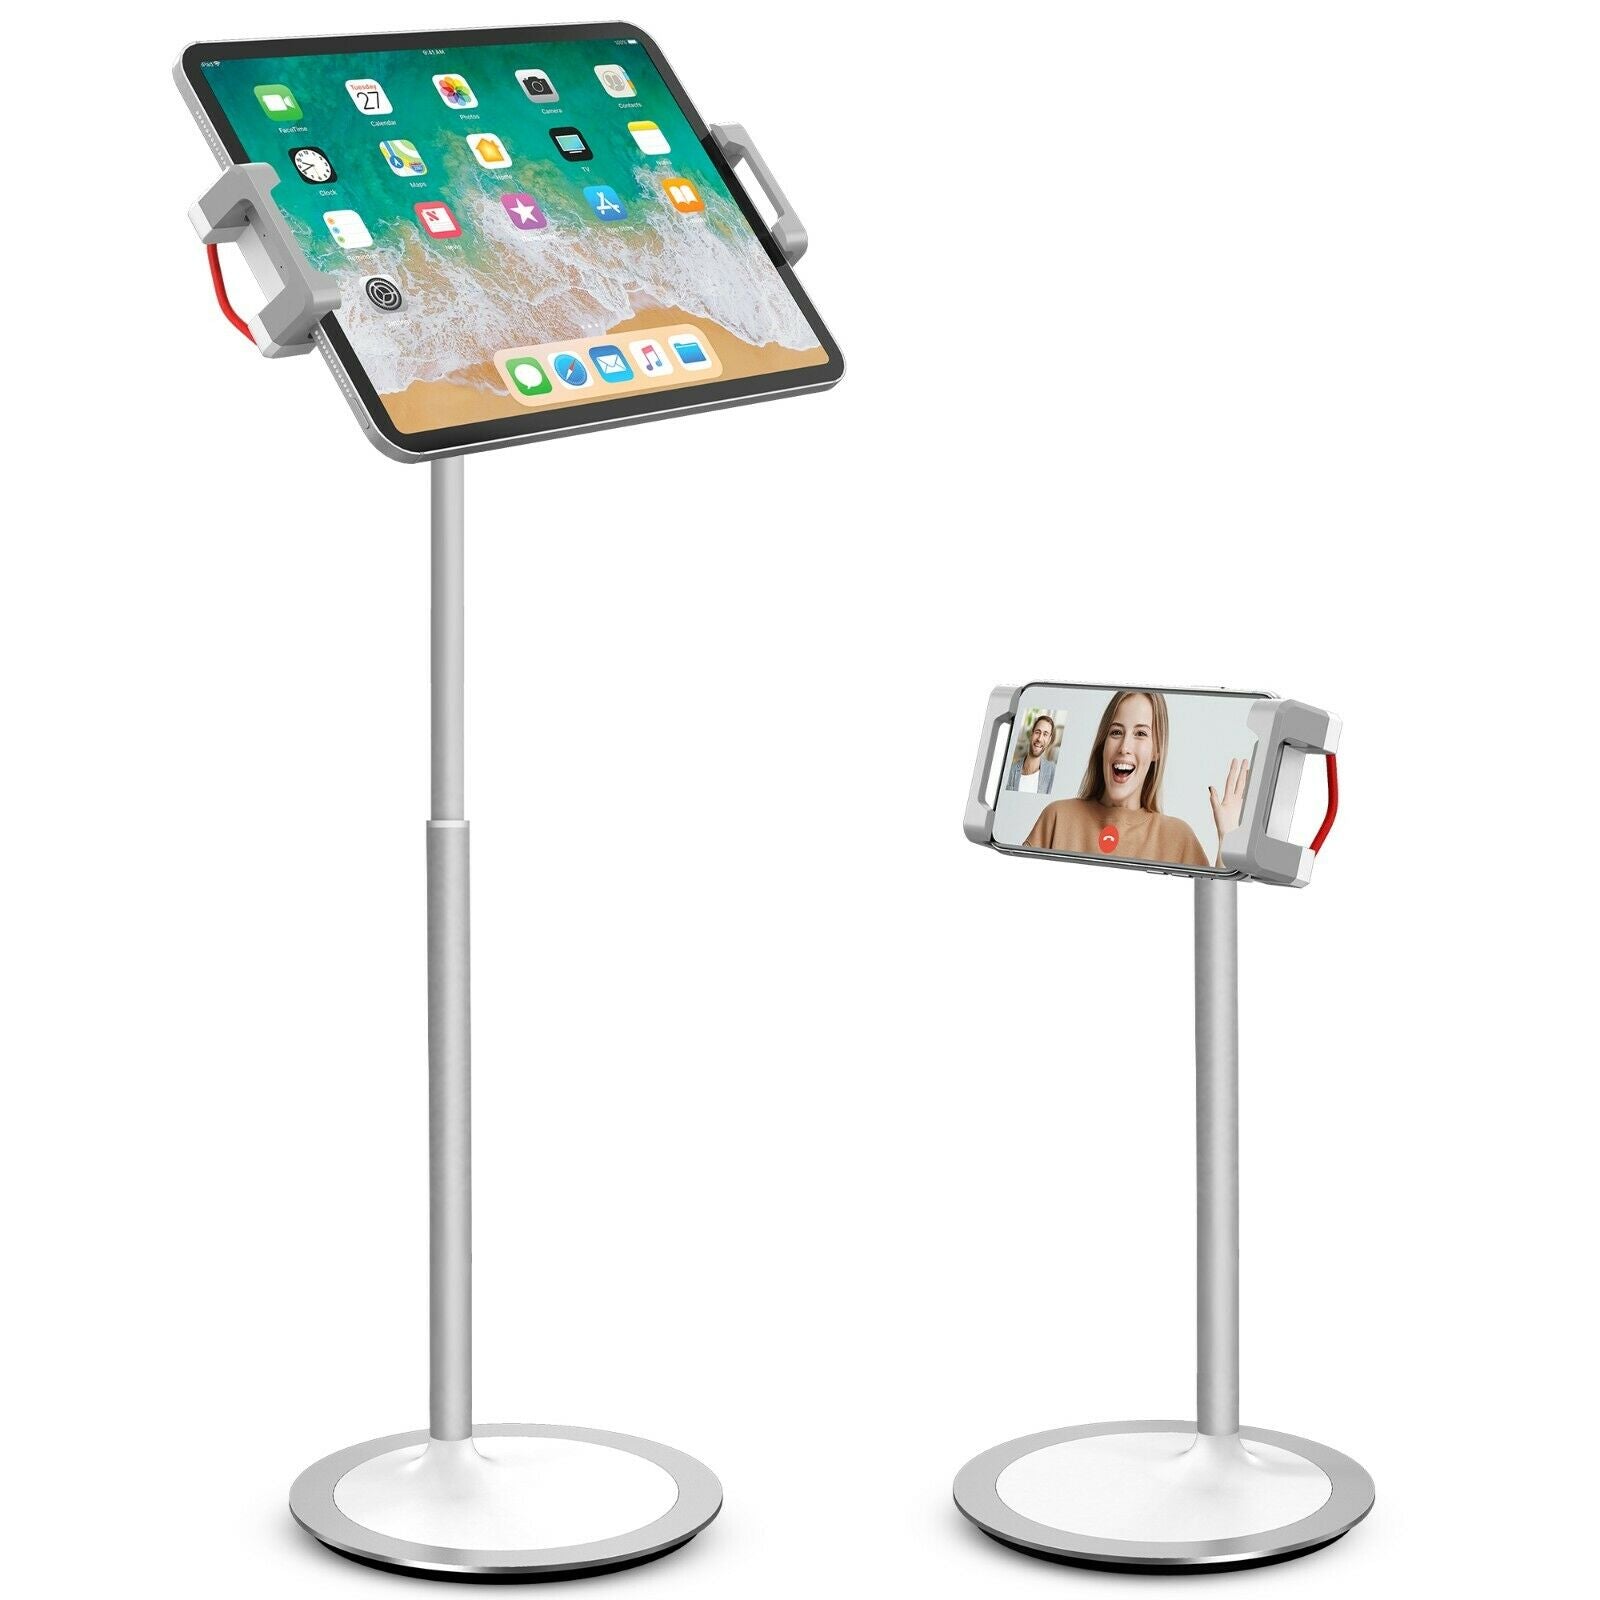 Purely 119 Tablet & Phone Stand